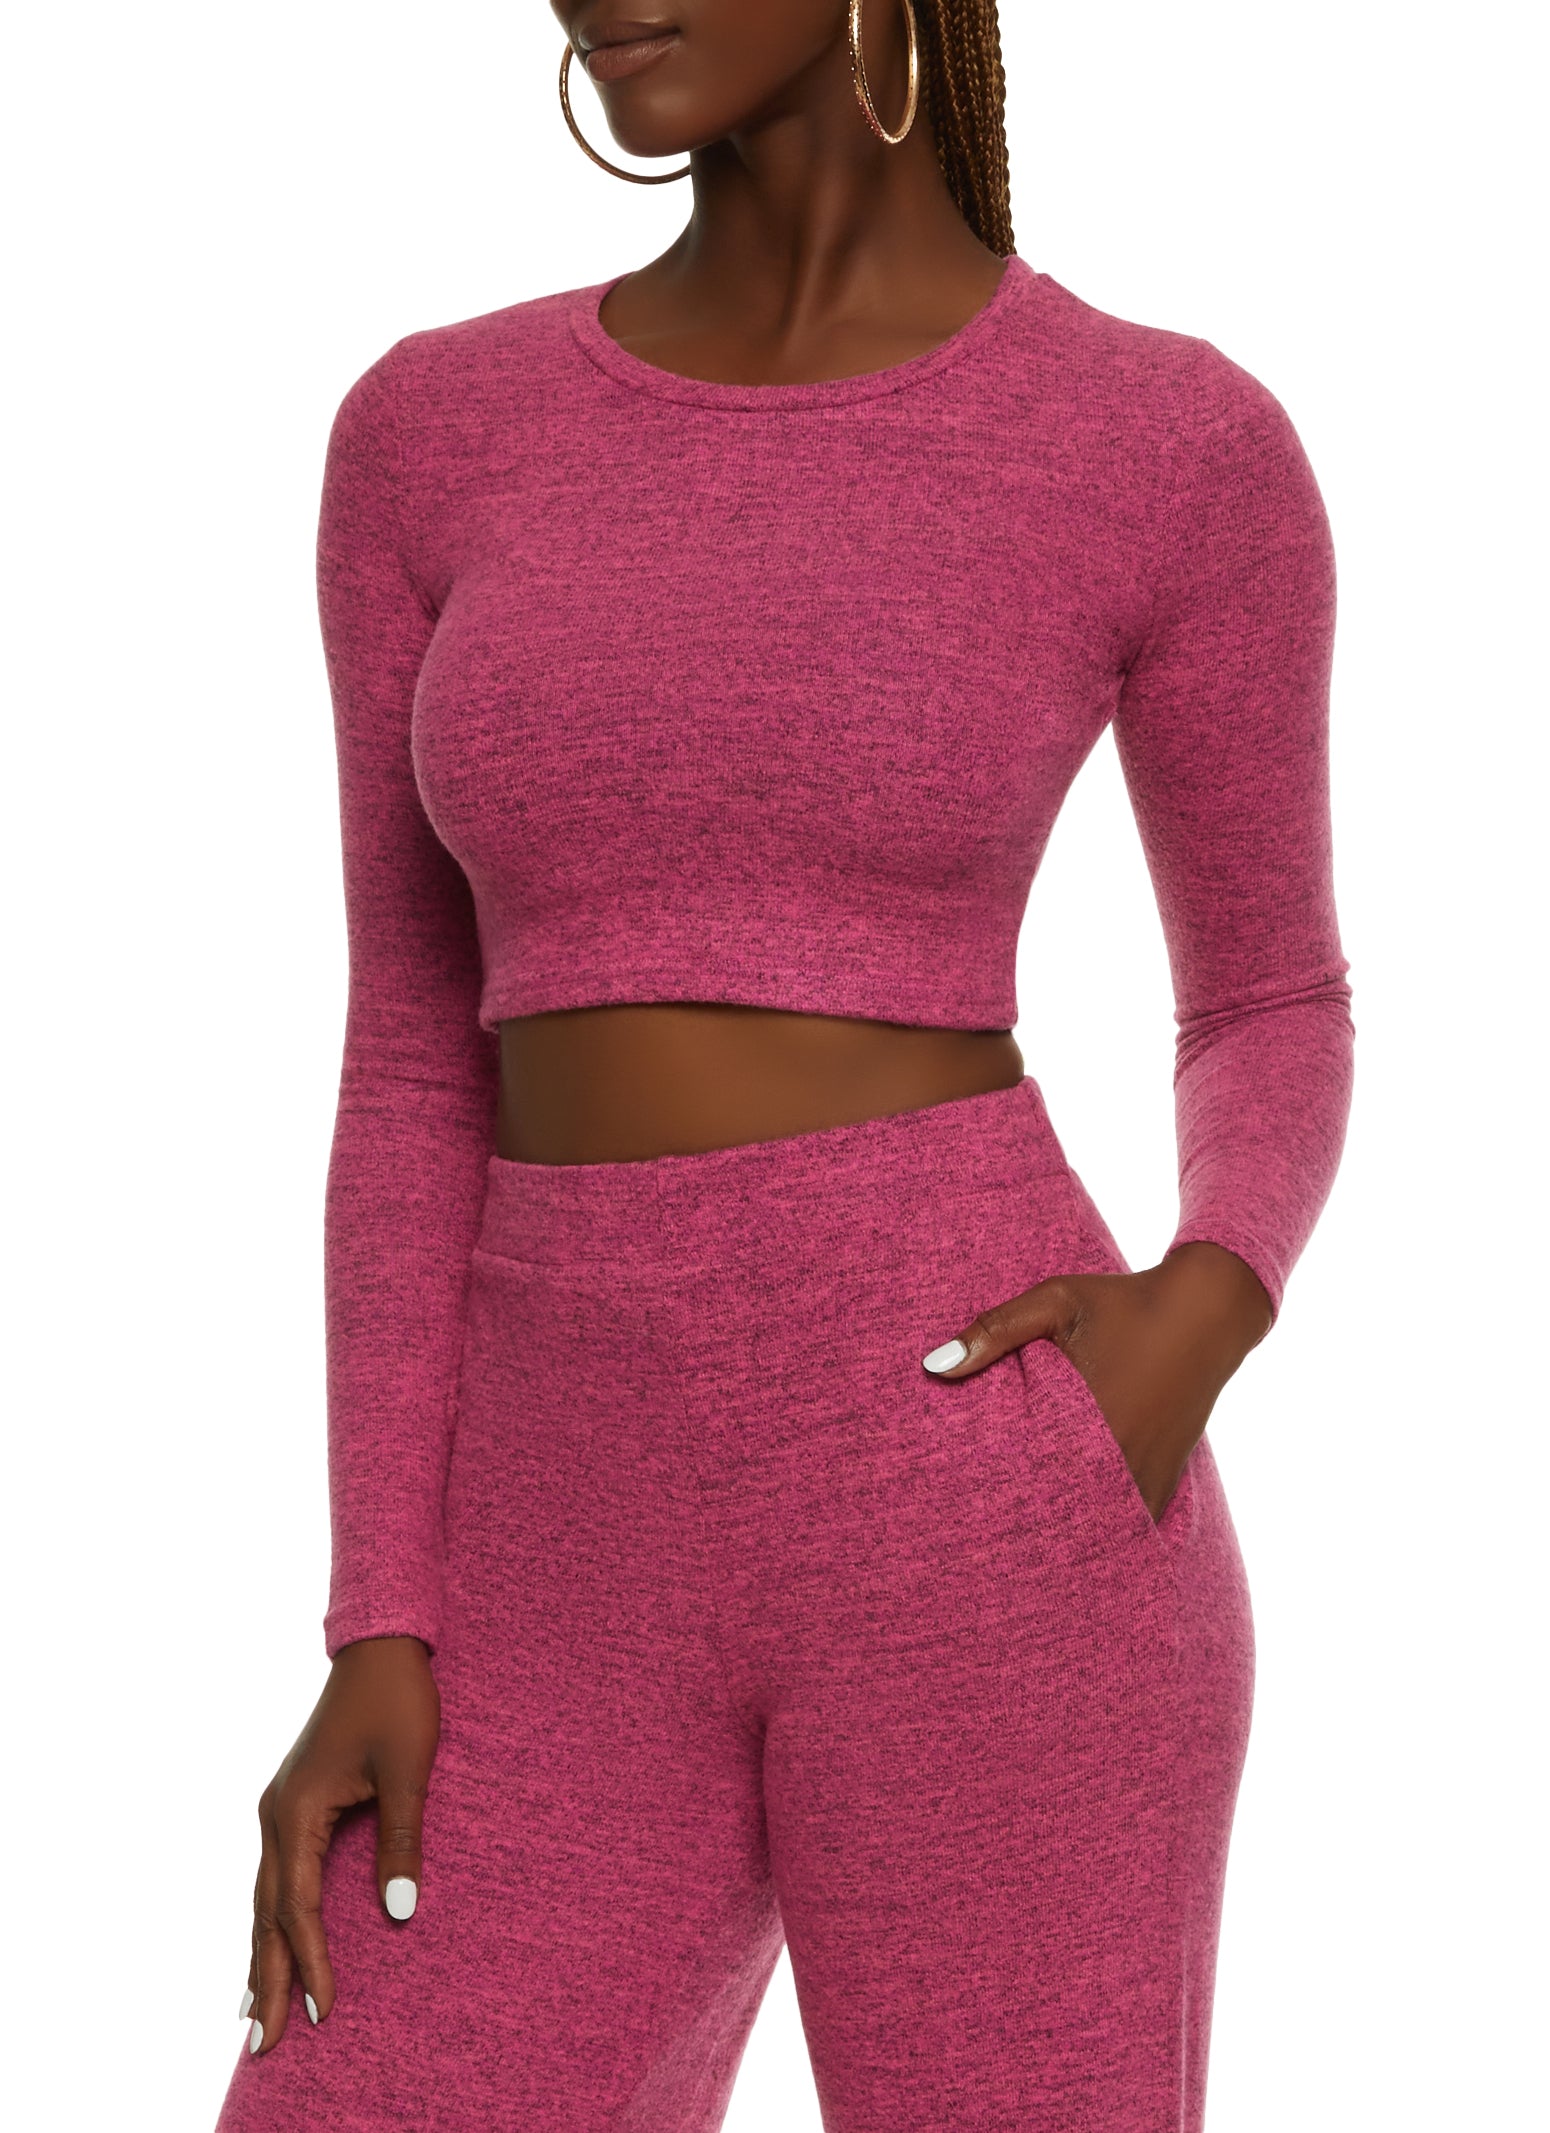 Brushed Knit Crew Neck Crop Top